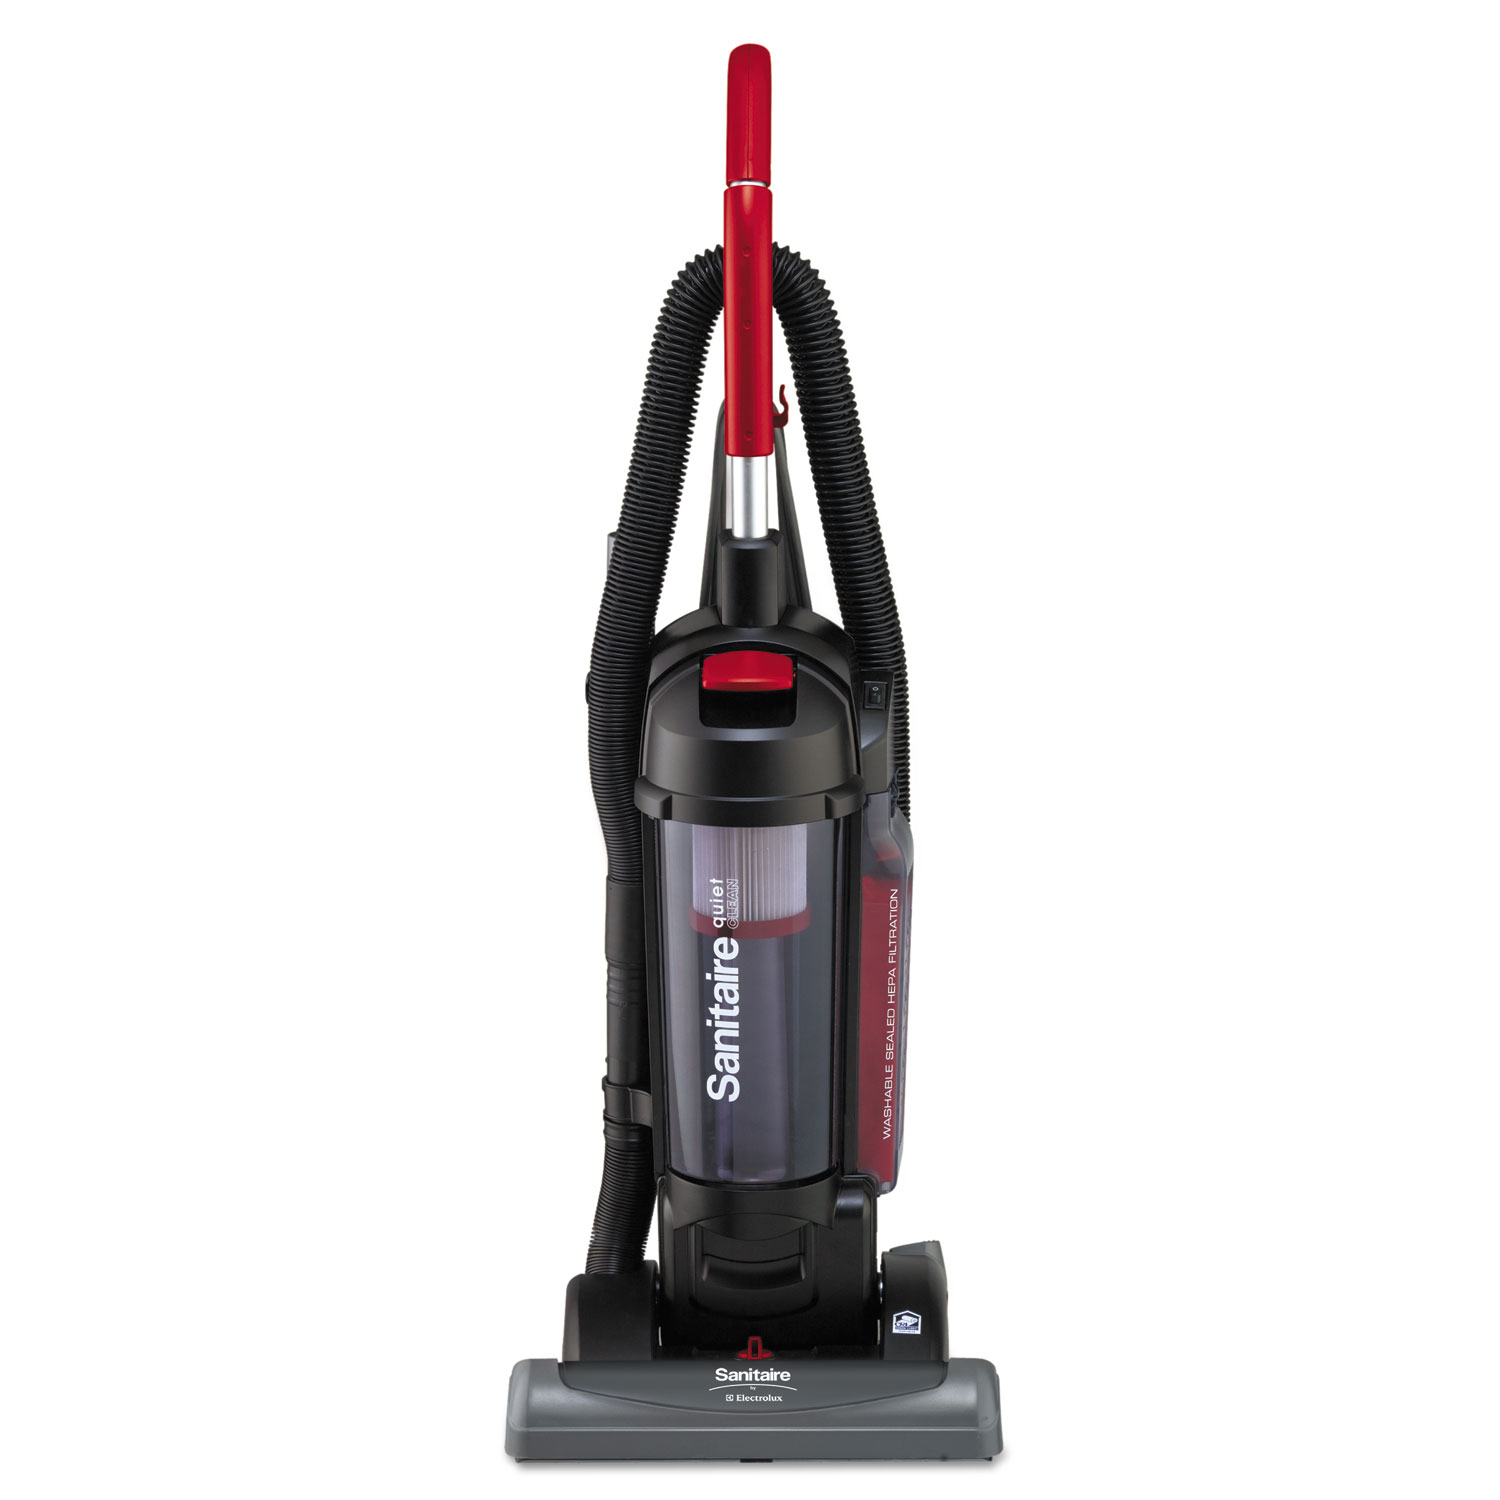 FORCE QuietClean Upright Vacuum with Dust Cup and Sealed HEPA Filtration, Black